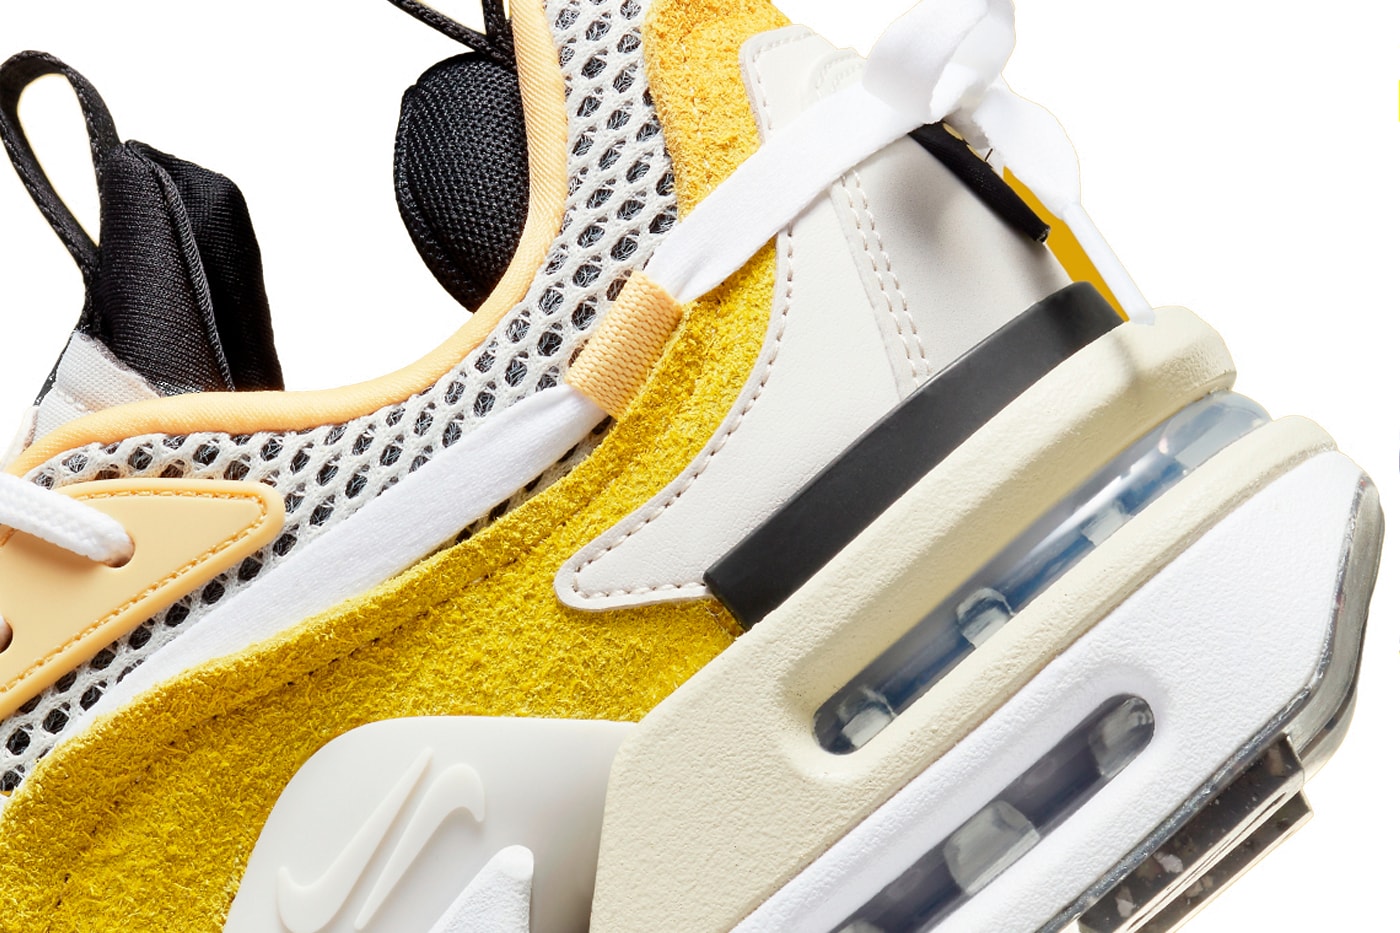 Nike Air Max Furyosa Makes a Bold Return With "Amarillo" FQ8933-001 release info swoosh chunky unconventional shoe